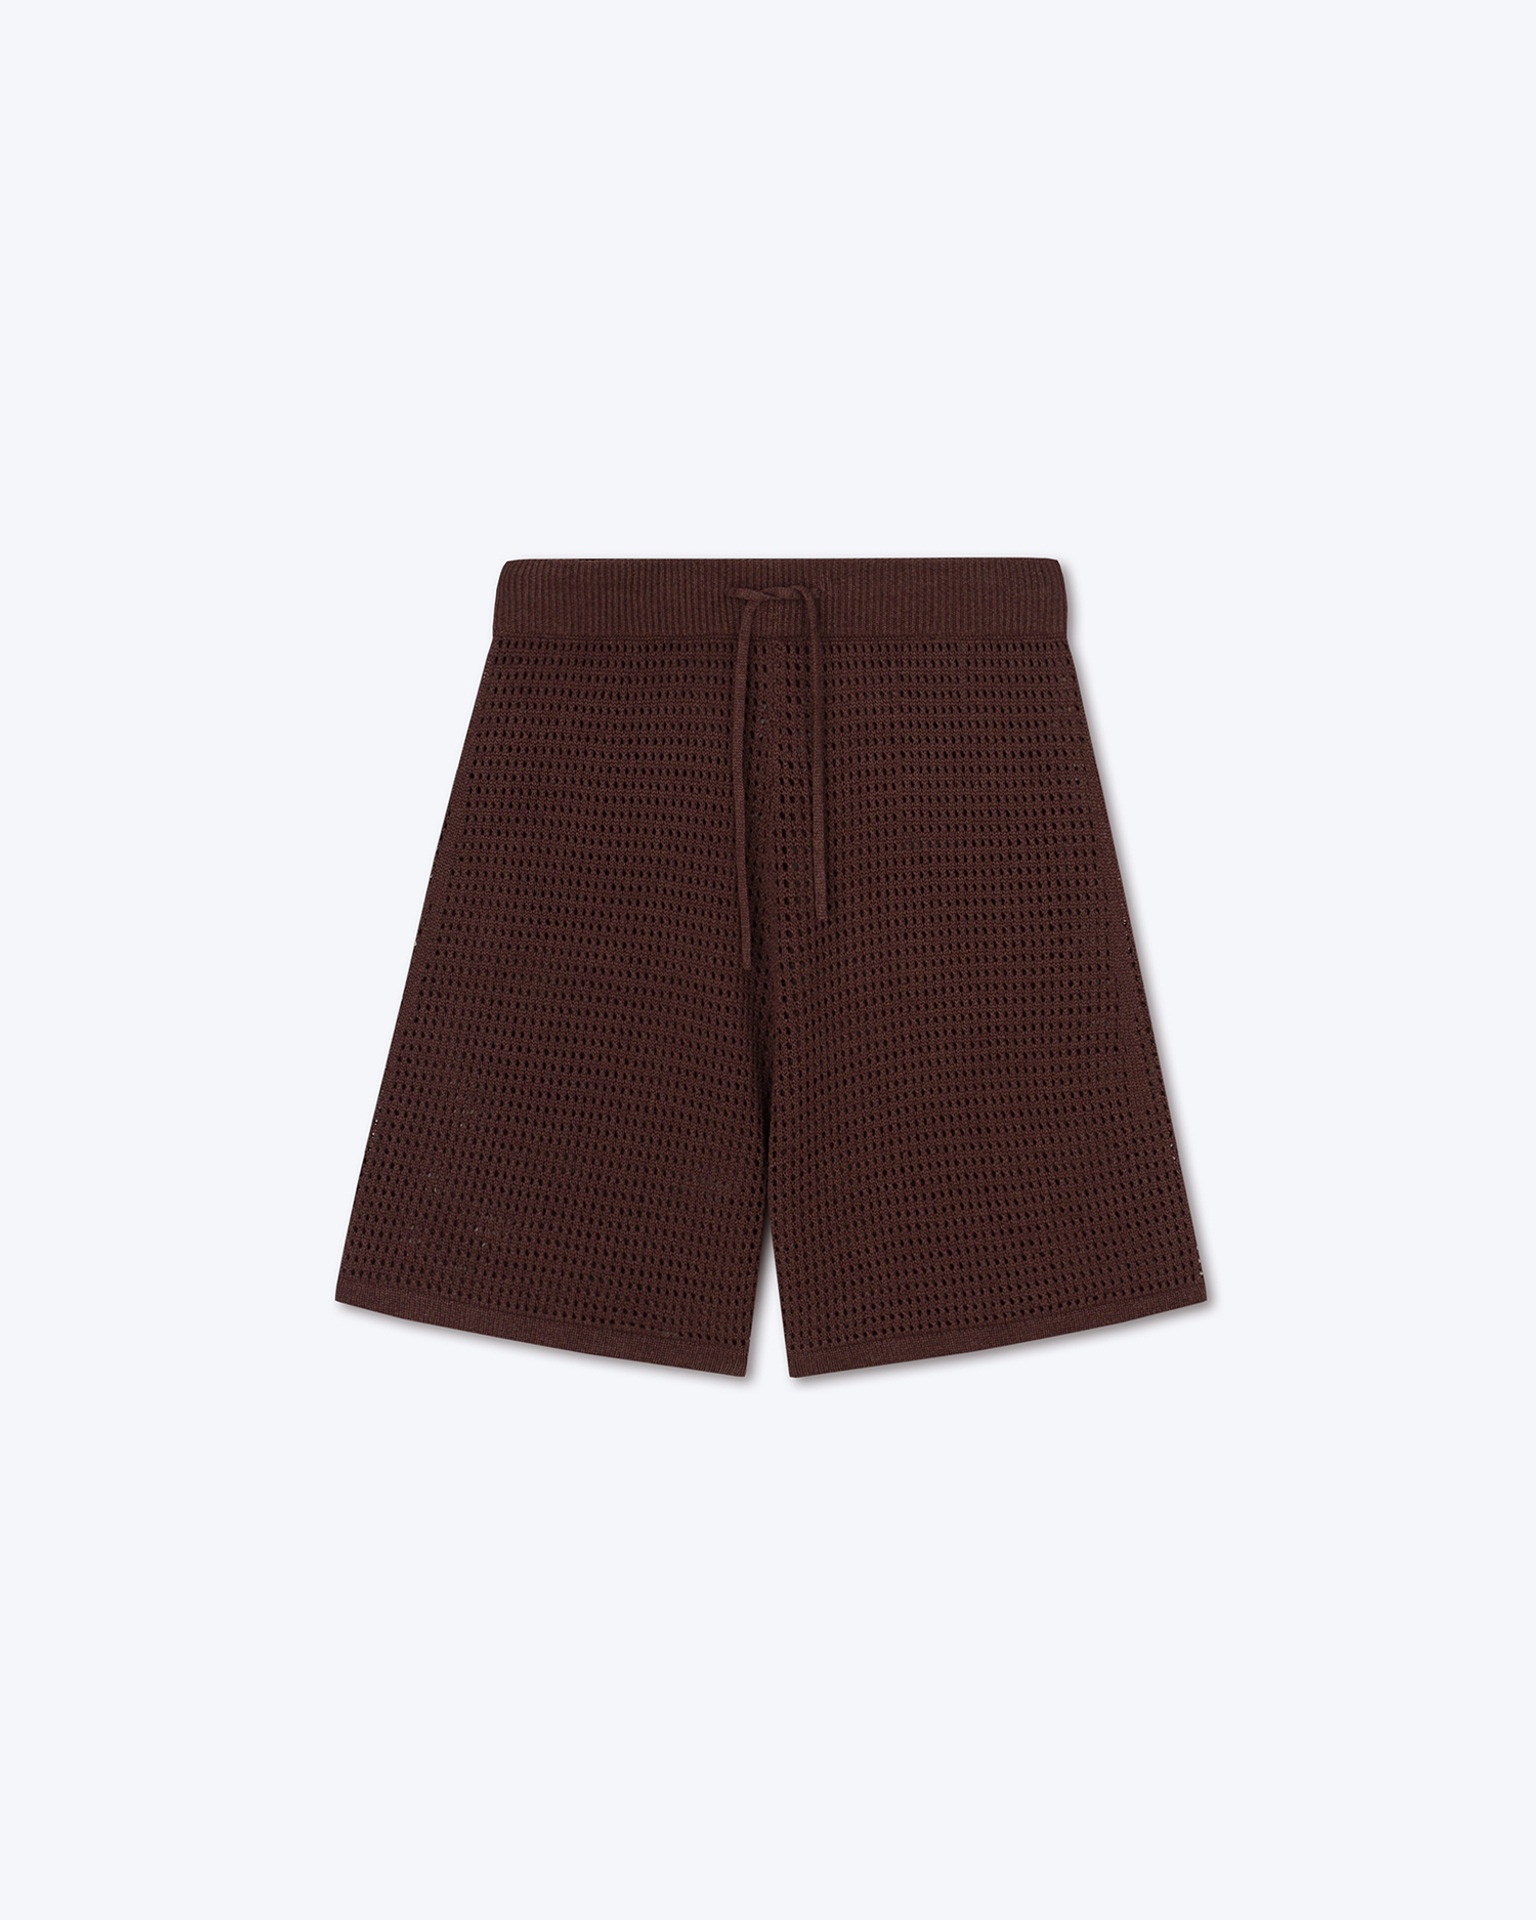 JAEL - Knitted shorts - Coffee bean - 1